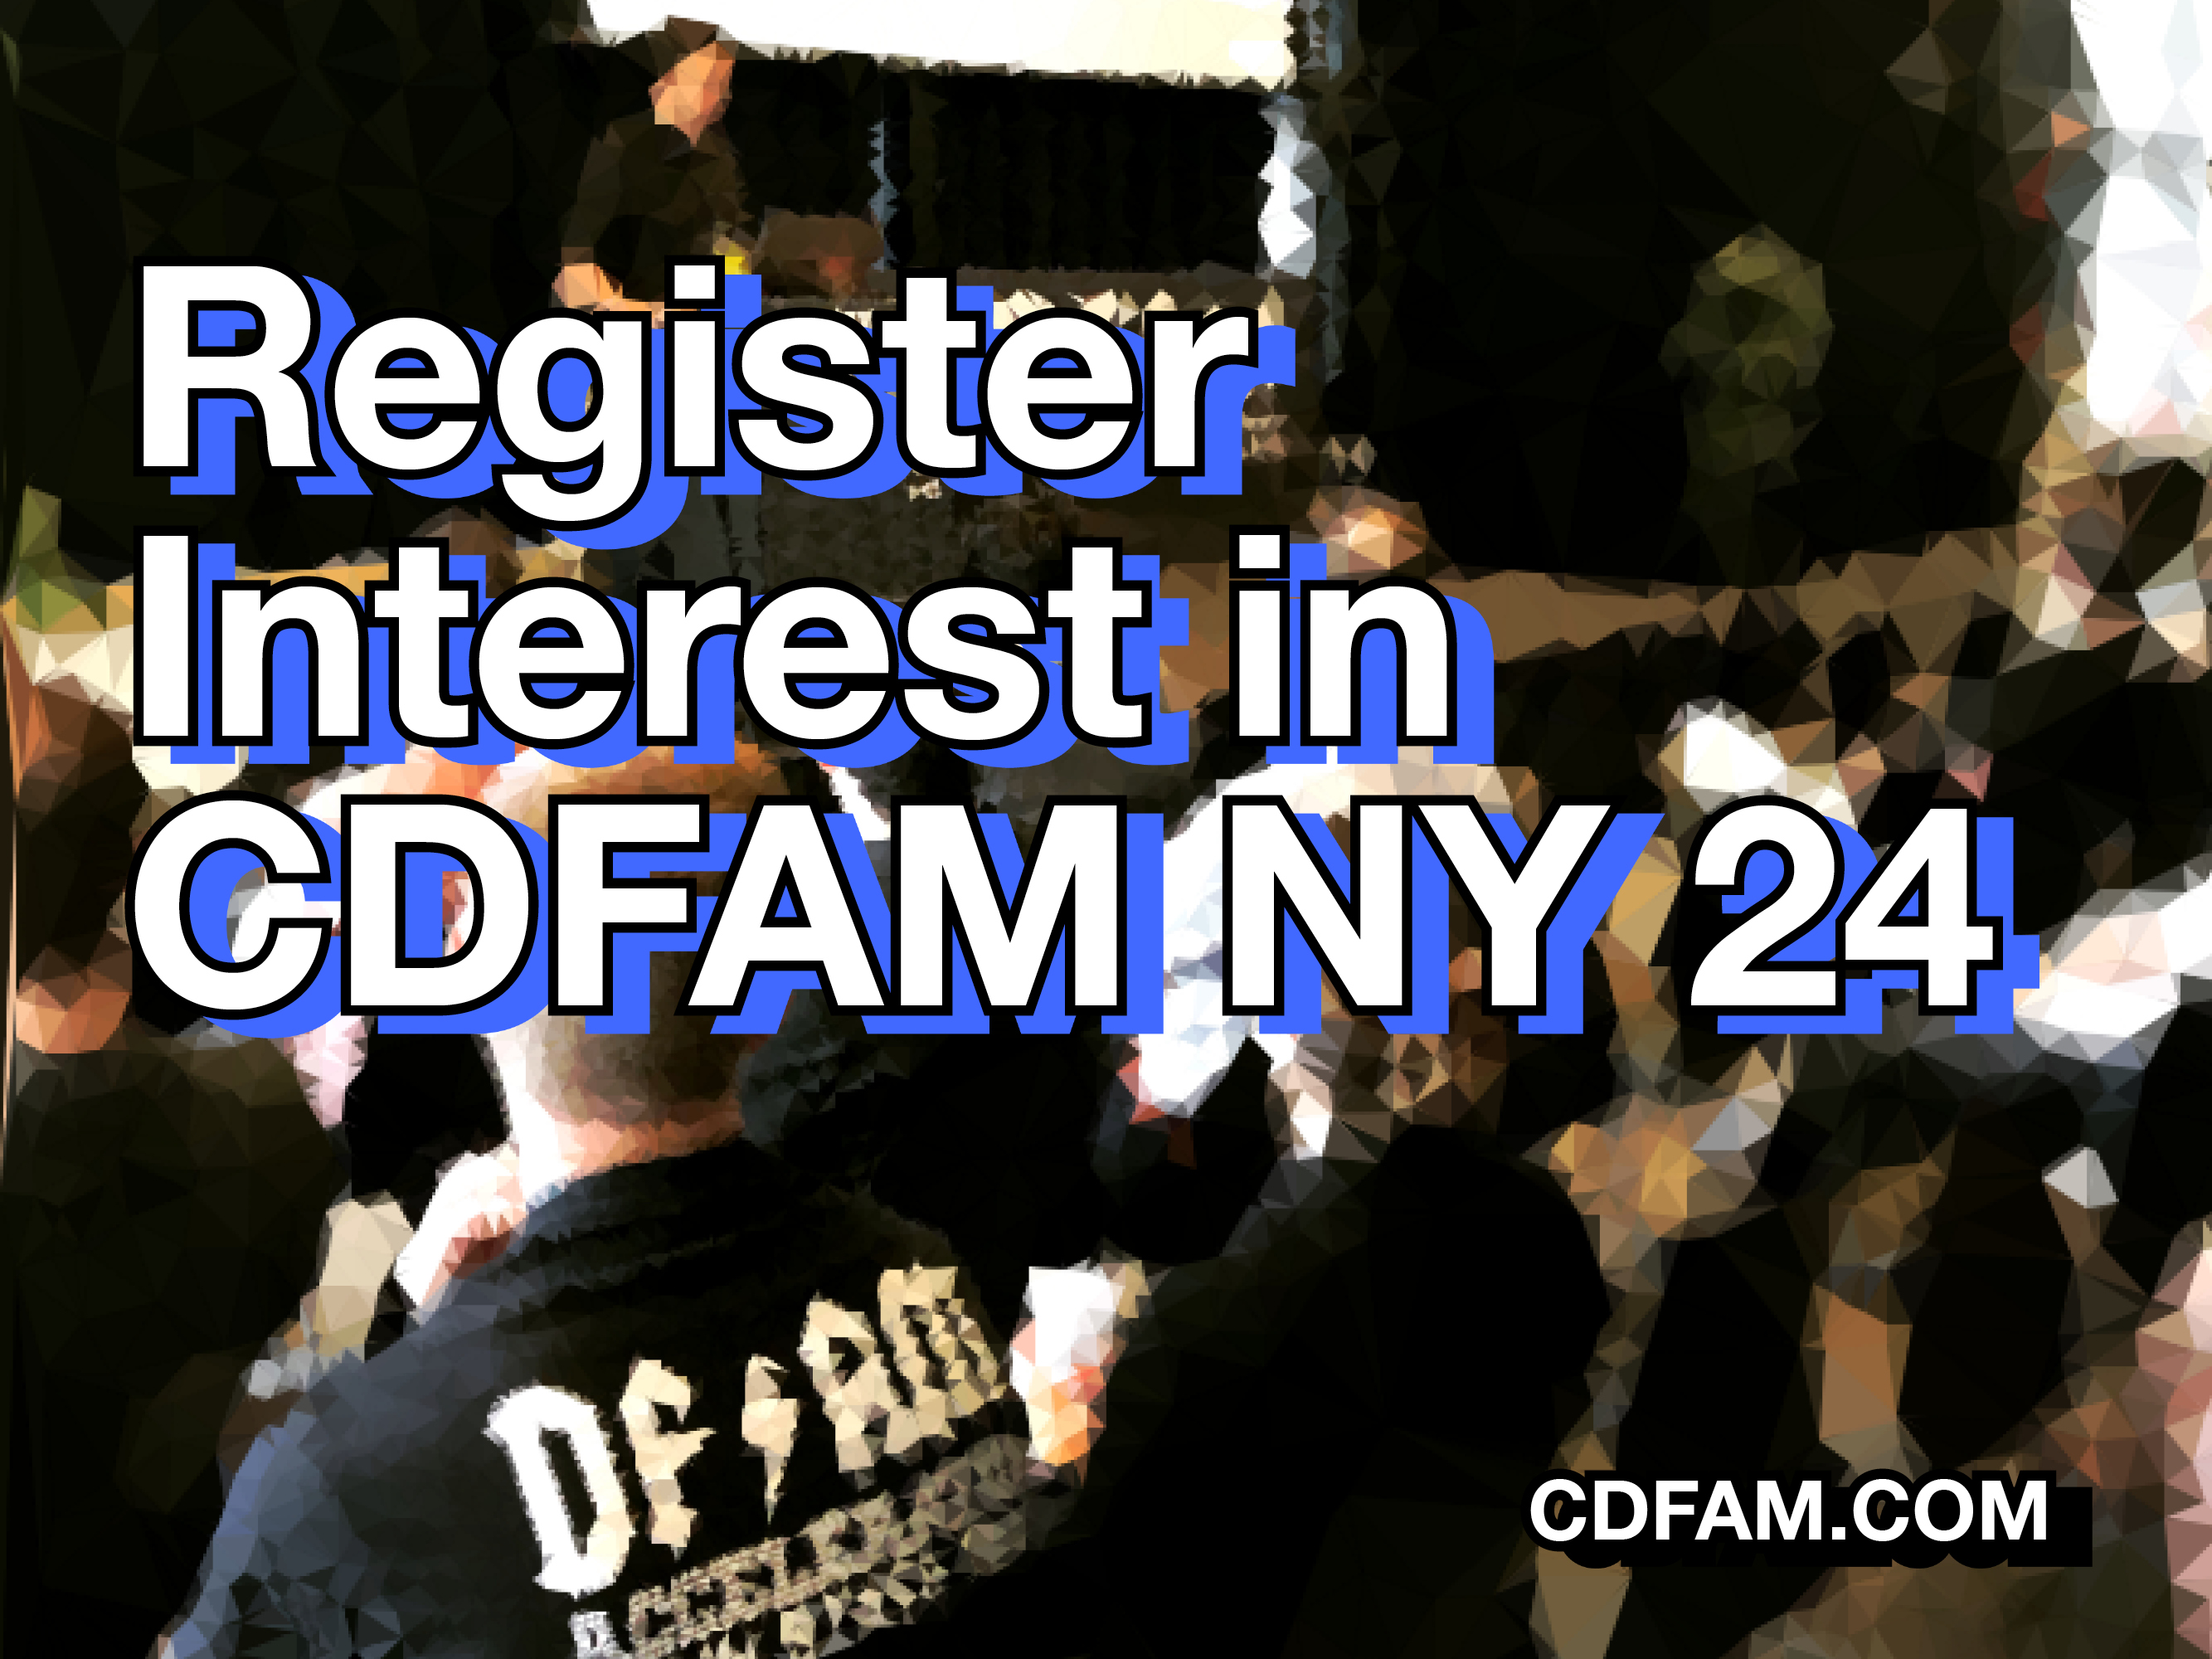 Register Interest in Attending and/or Presenting at CDFAM NY 24